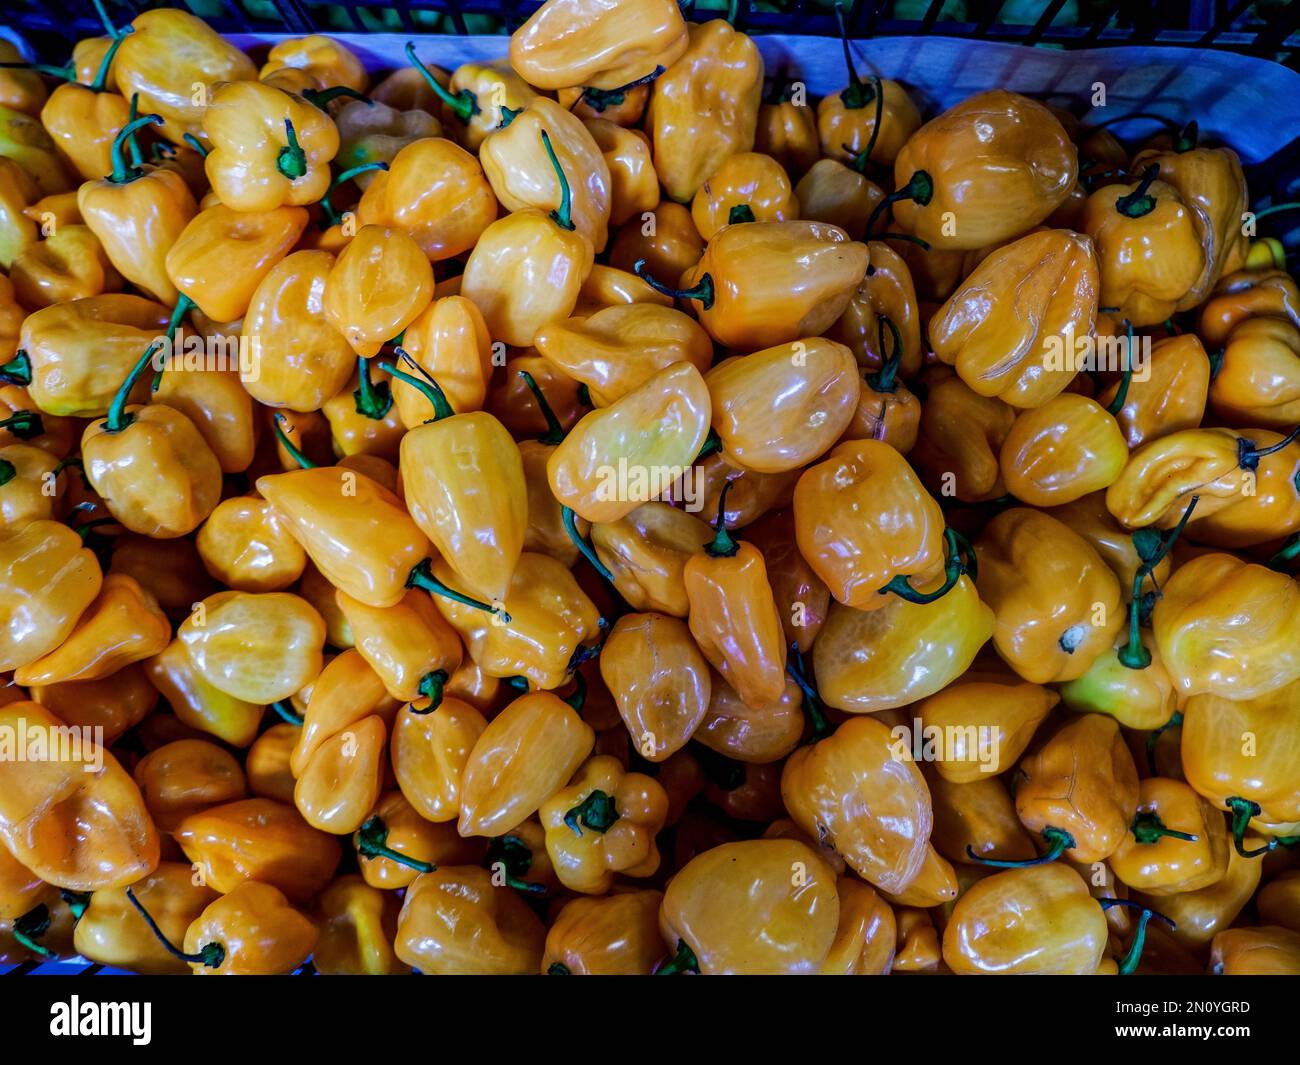 Orange healthy sweet bell peppers ripe raw and organic - a large quantity ready for purchase Stock Photo